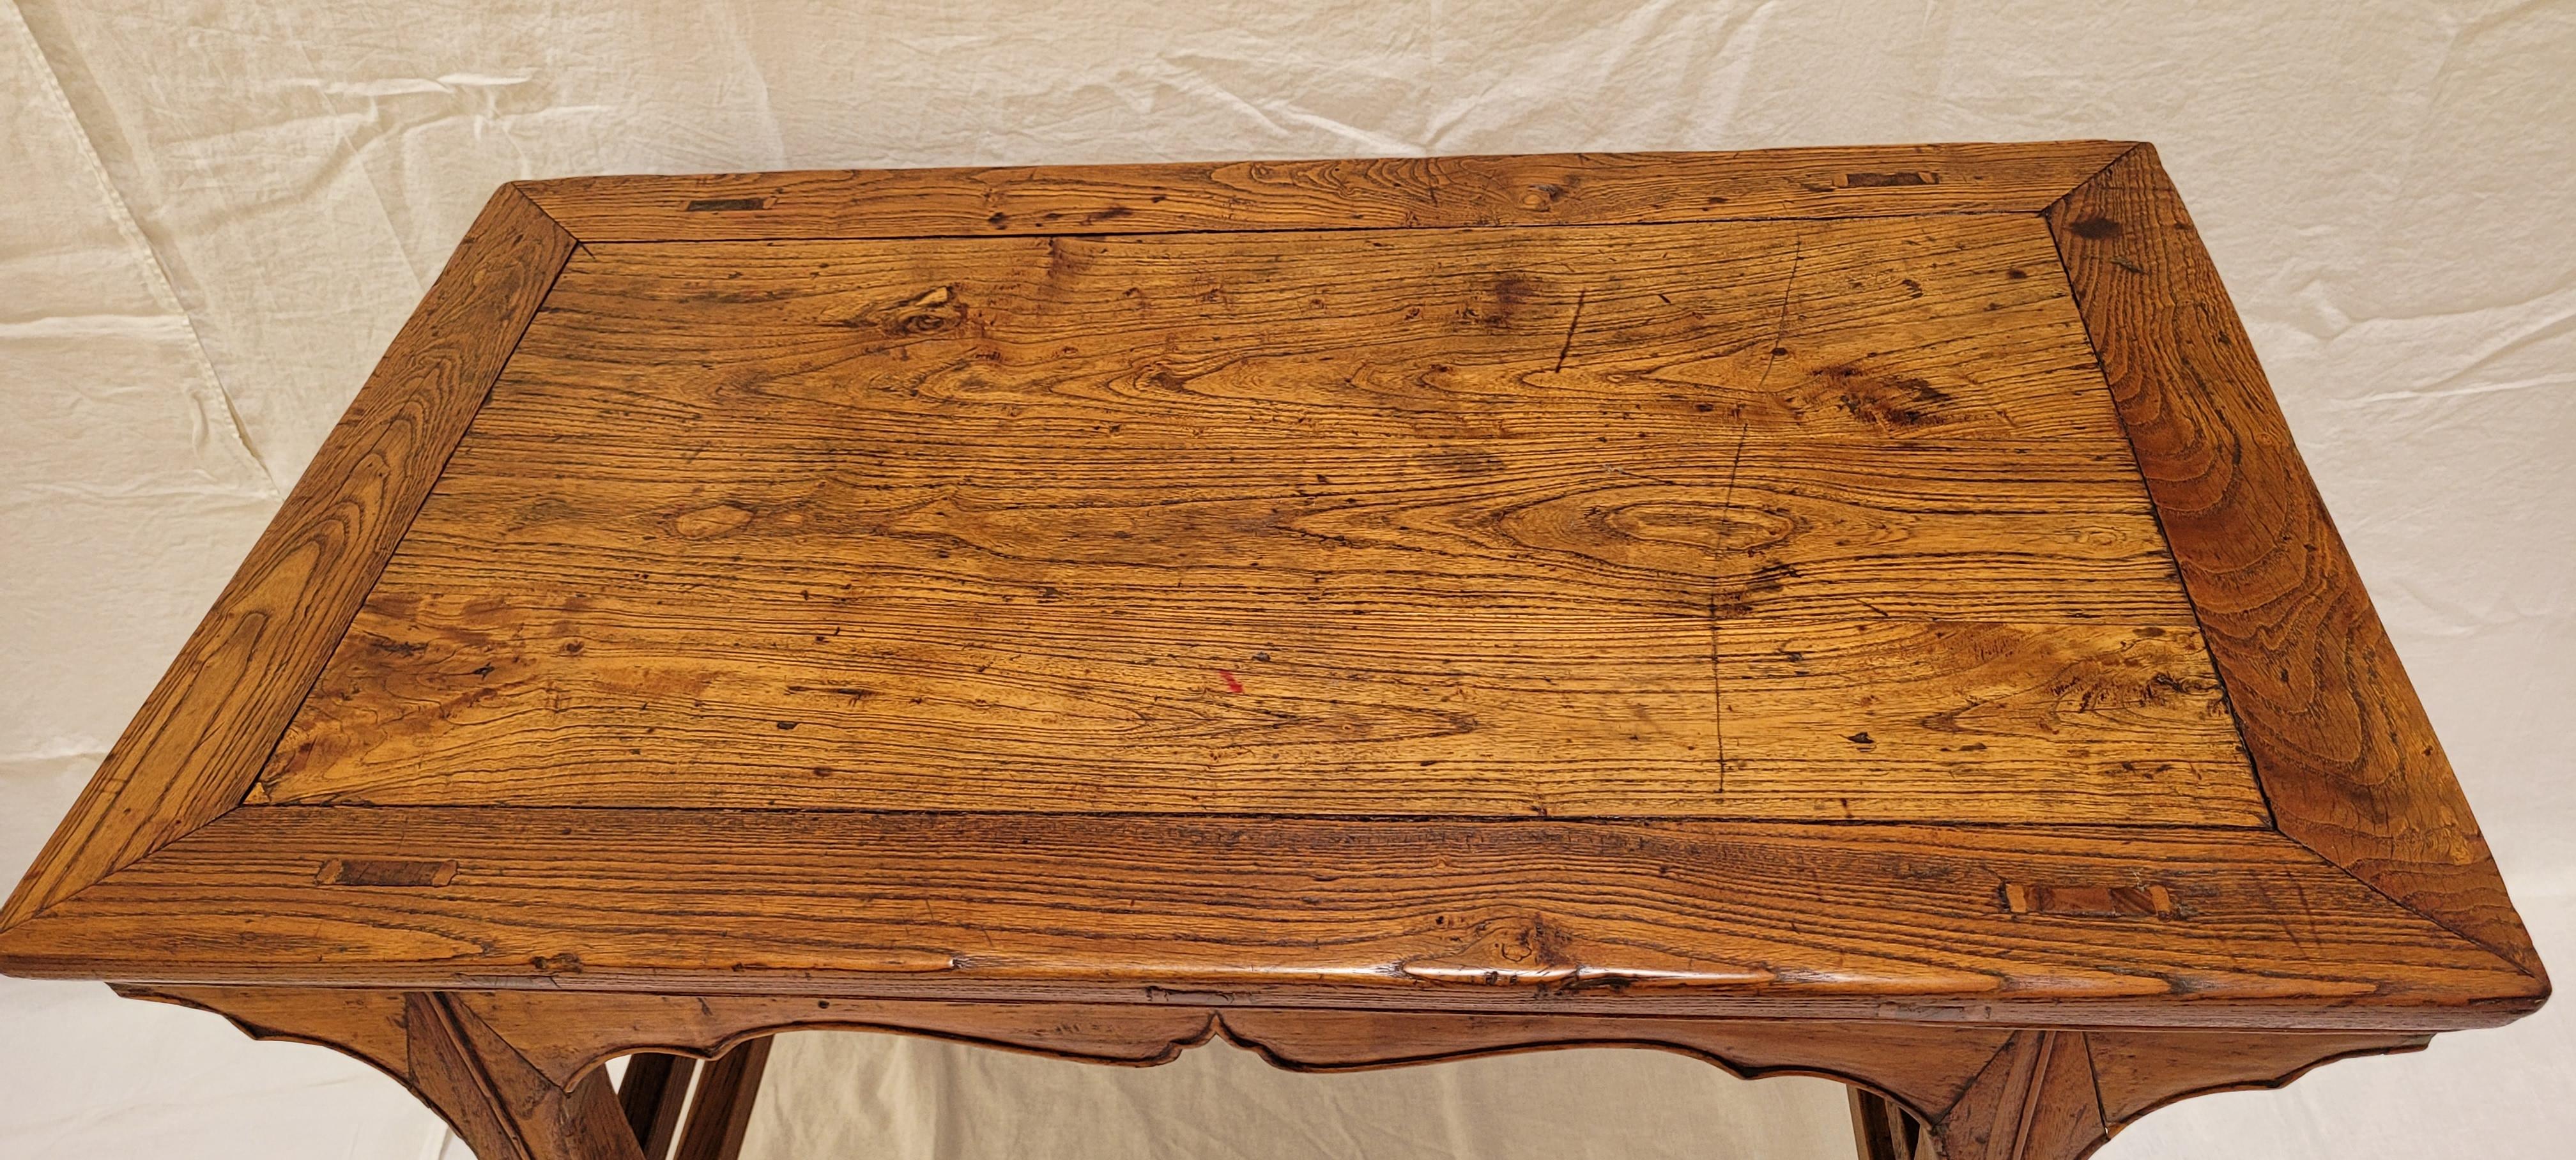 Chinese 17th Century Wine Table - 1650 -1700 For Sale